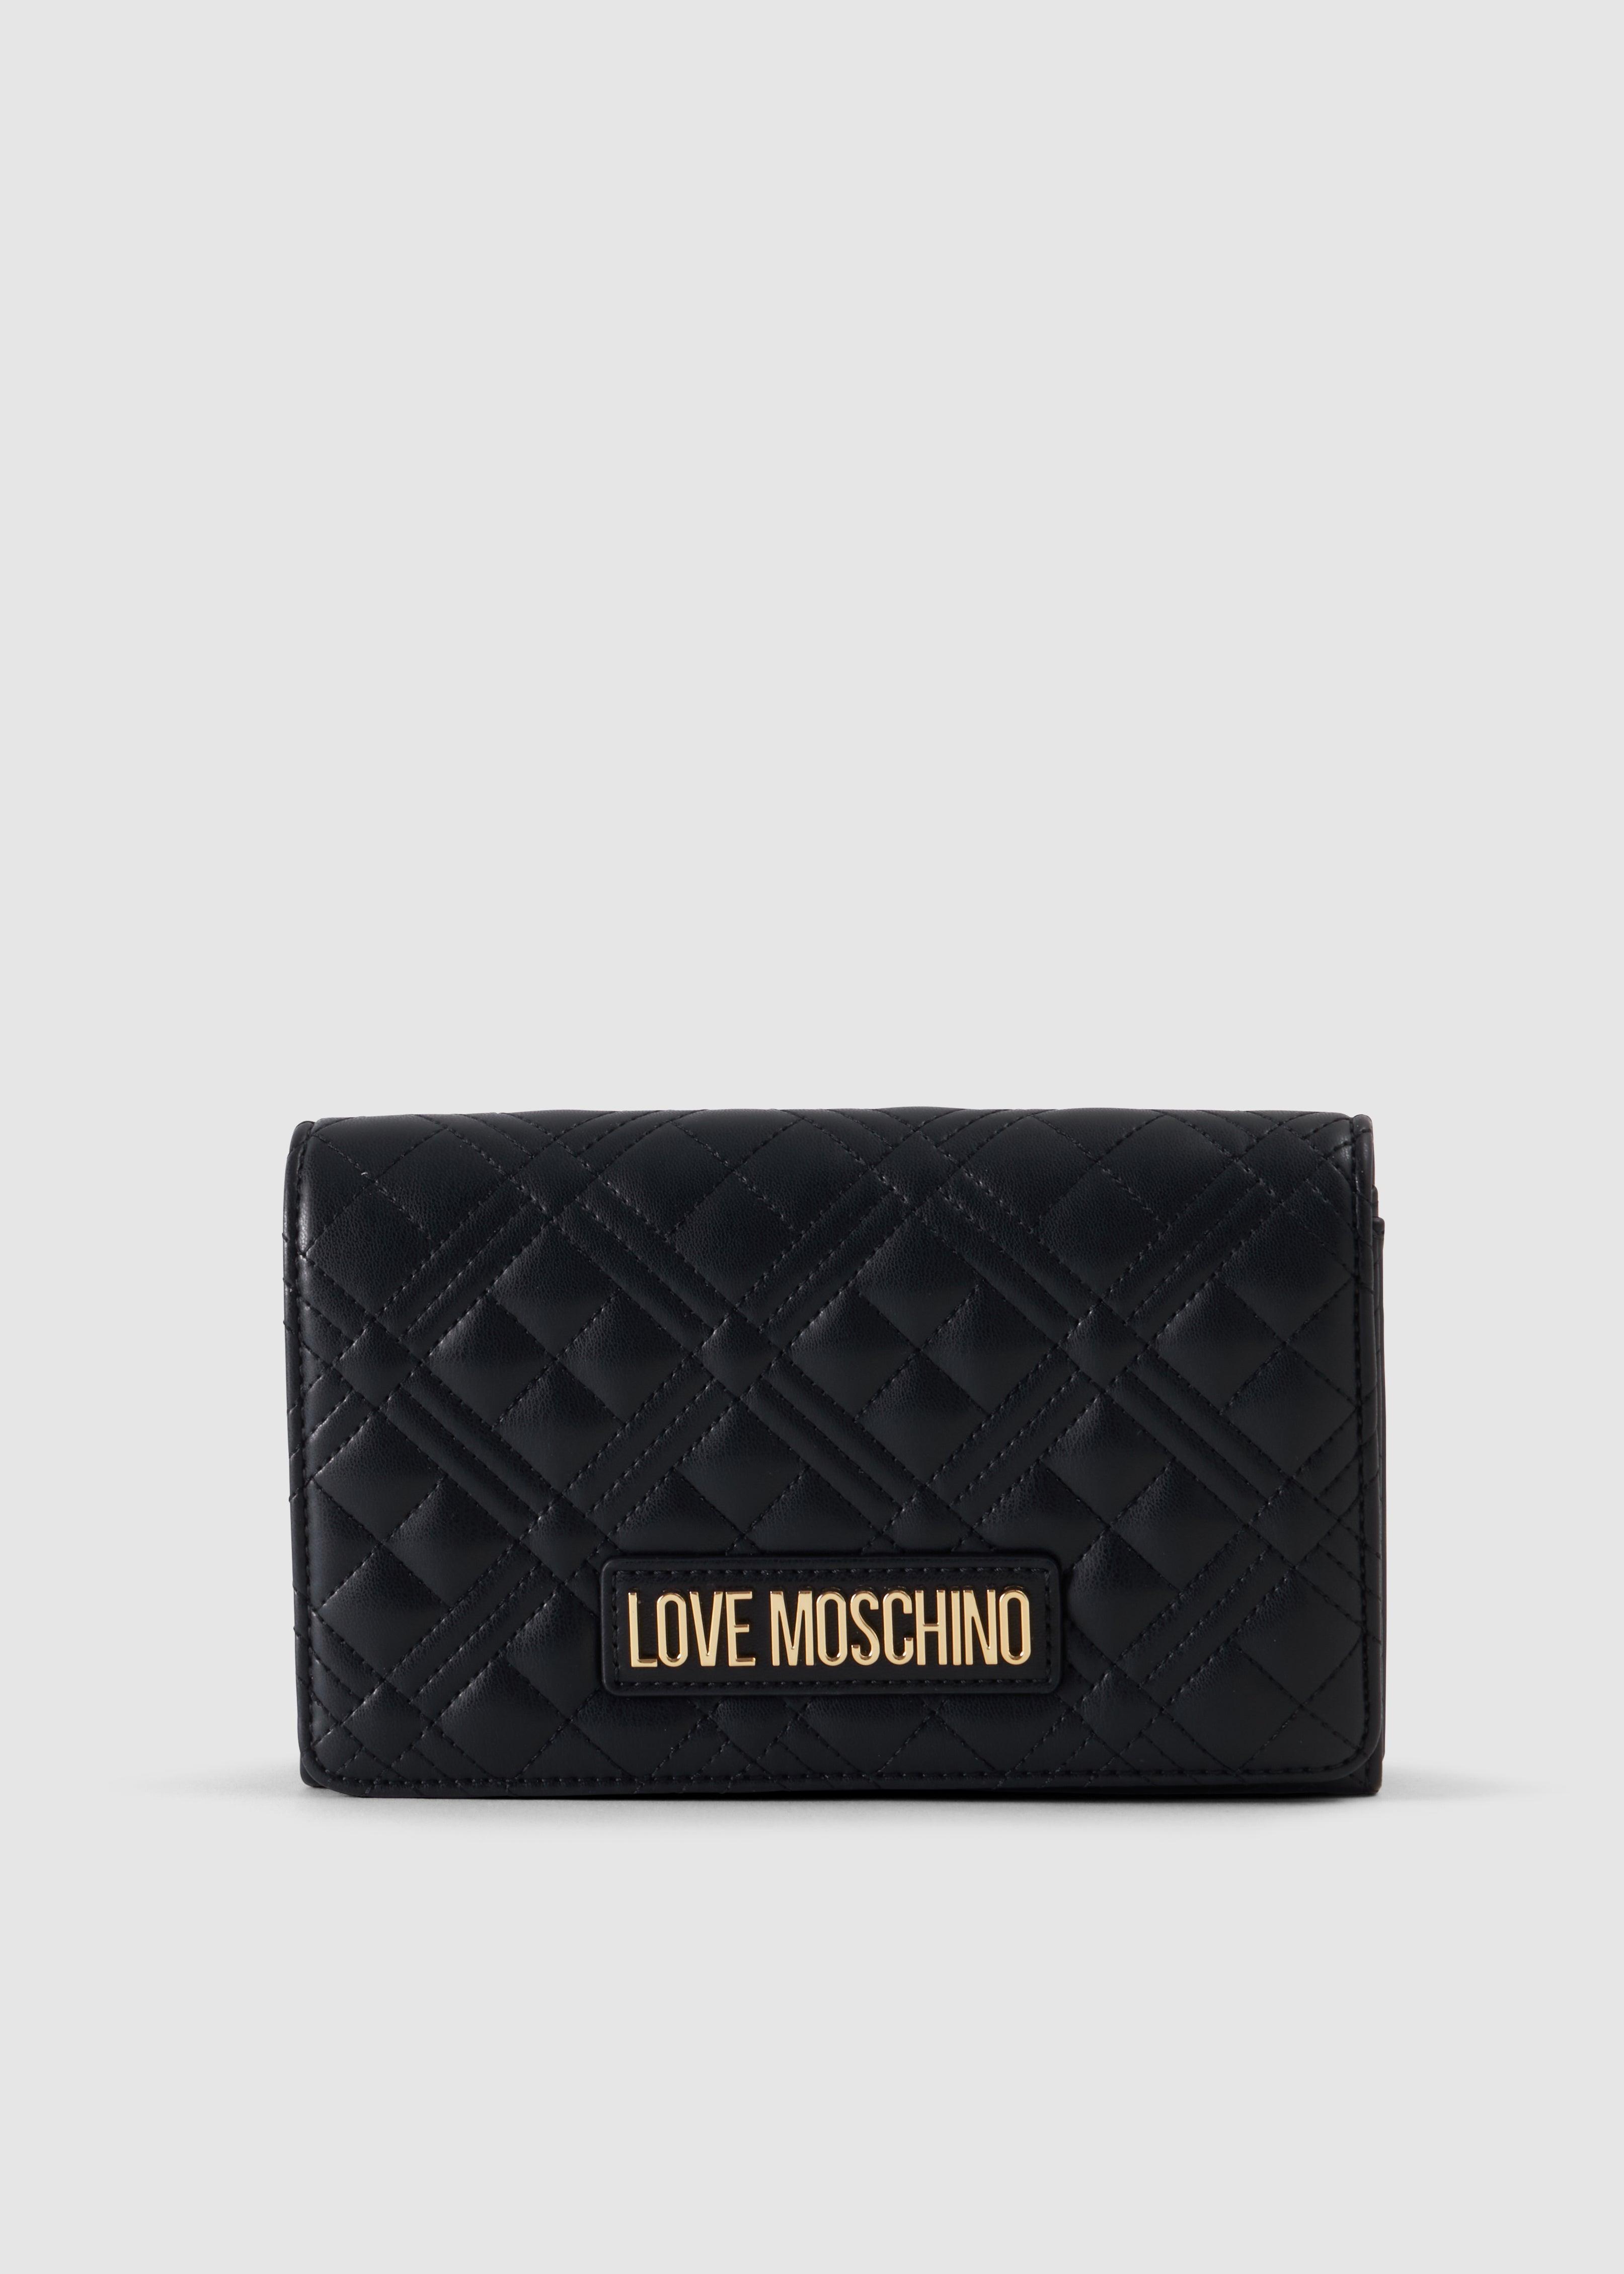 Love Moschino Front Fold Handbag With Heart Logo In Noir in Black | Lyst